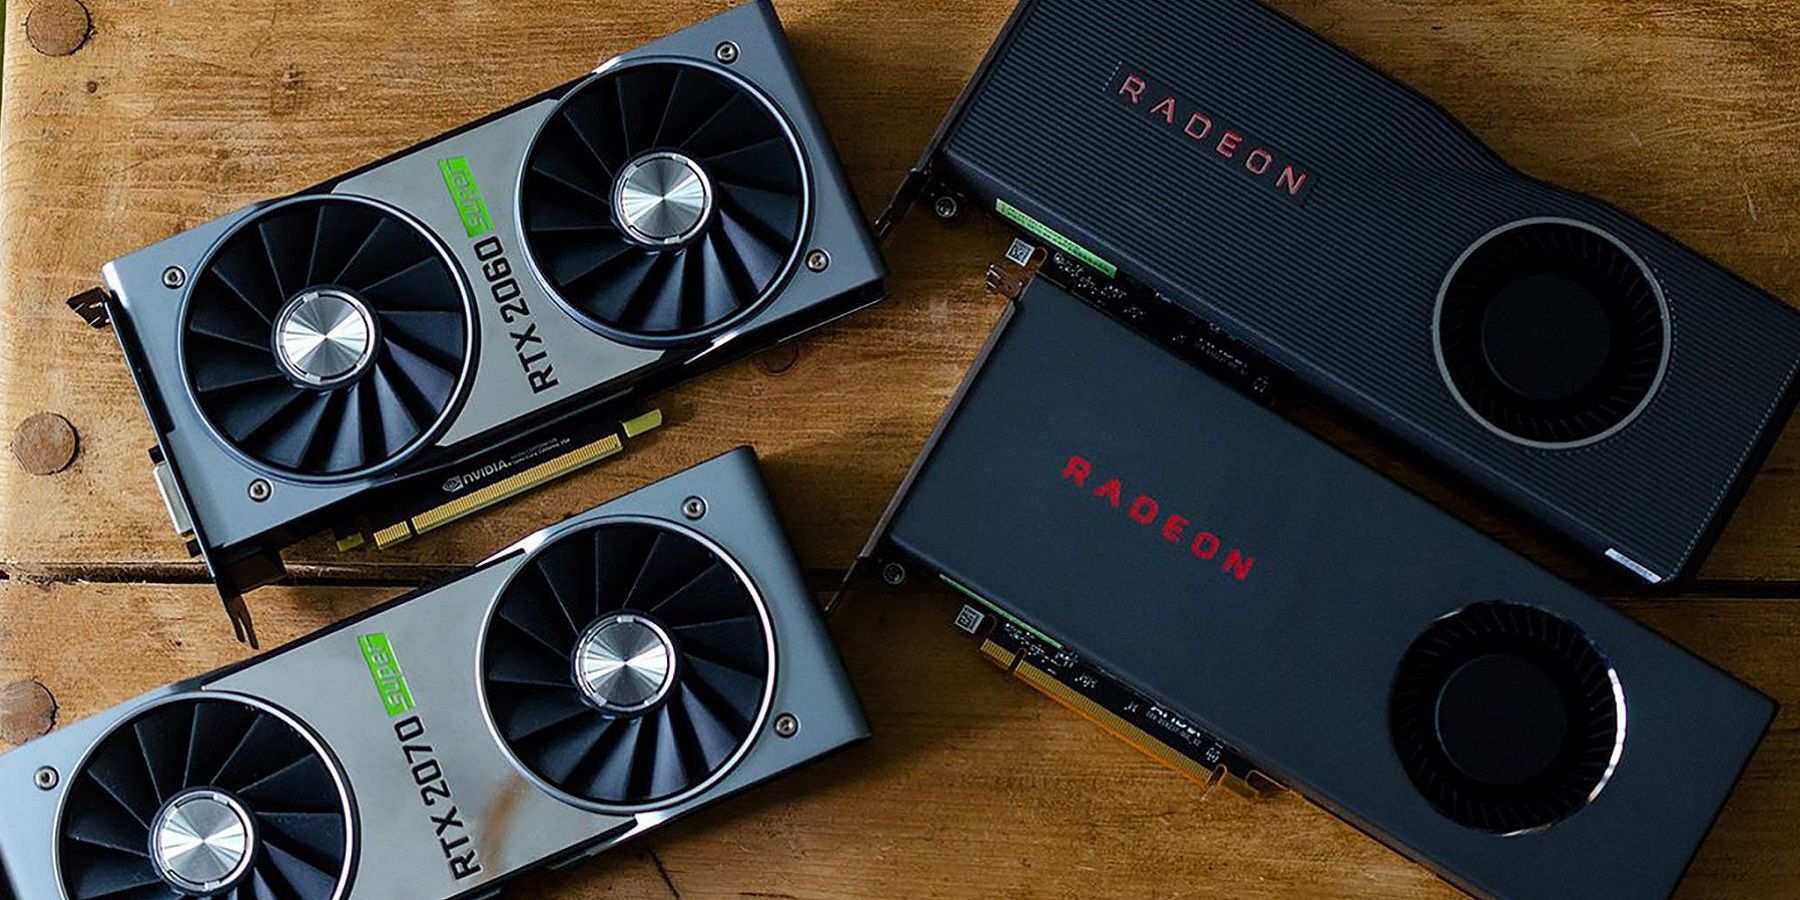 A photo showing two Nvidia RTX 20-series cards next to two AMD Radeon cards.